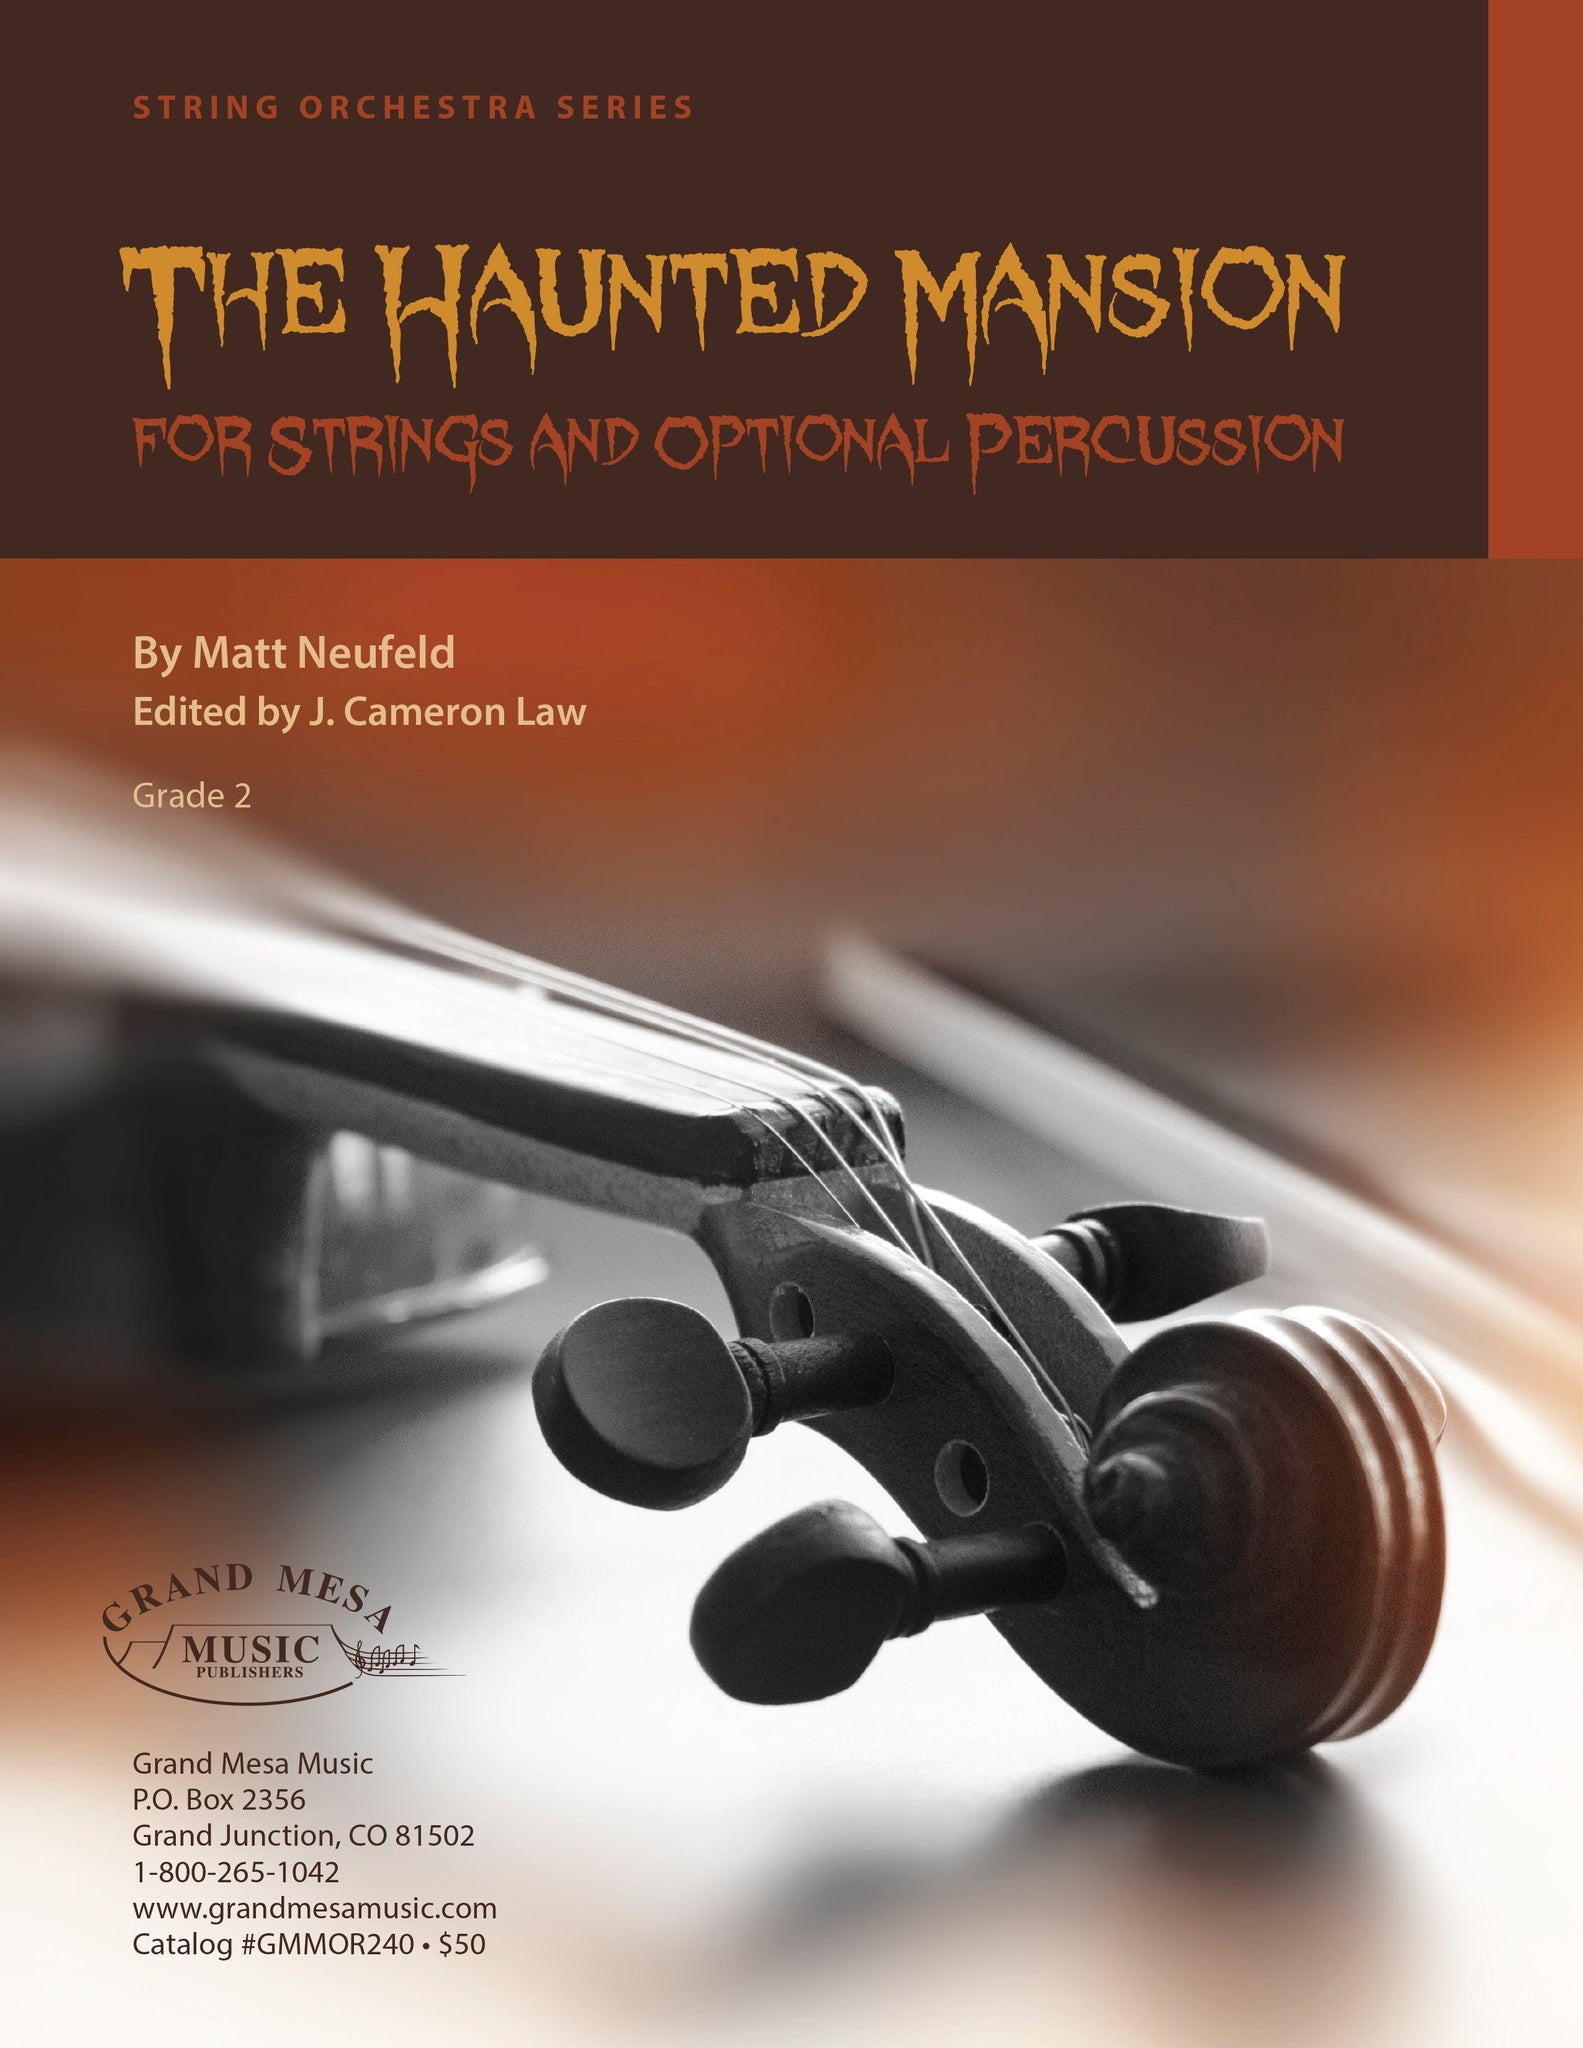 Strings sheet music cover of The Haunted Mansion for String, composed by Matt Neufeld.